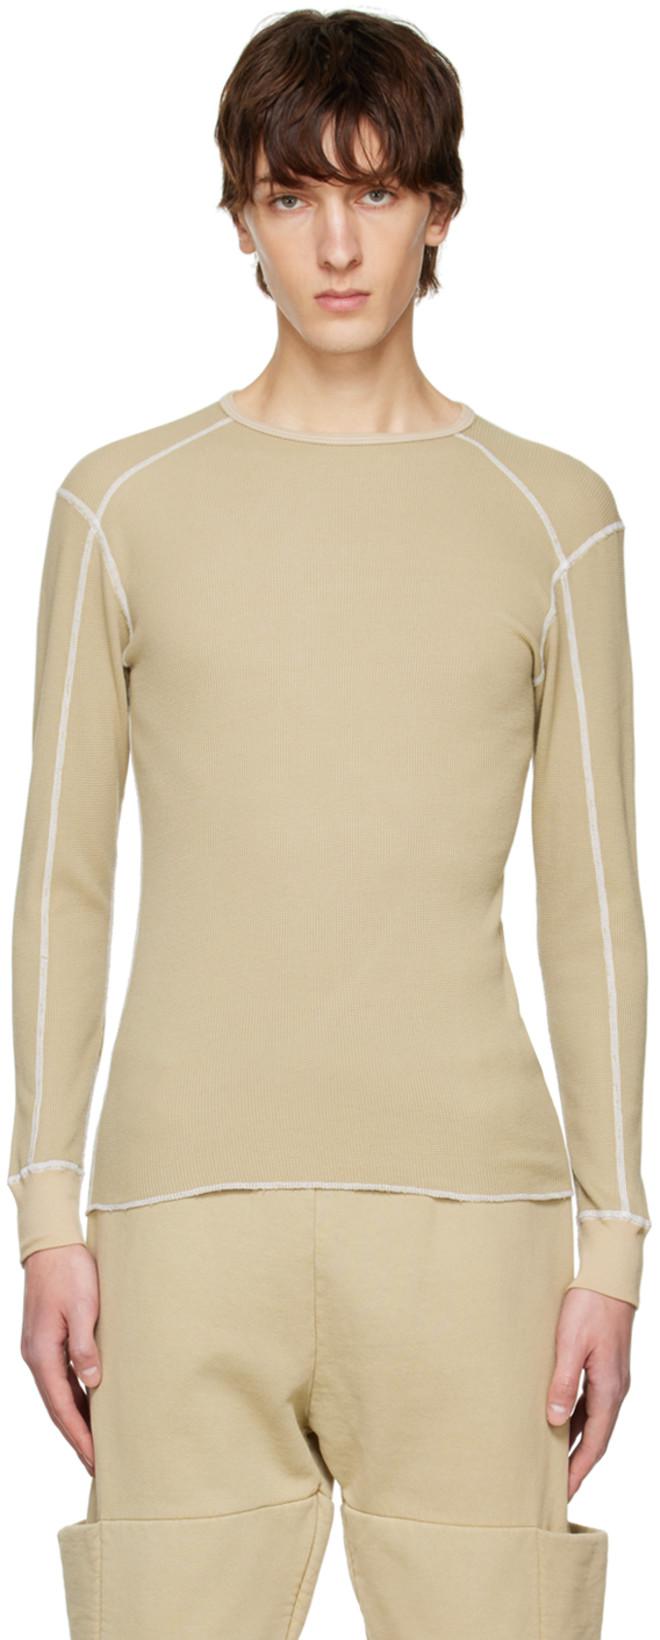 Beige K3 Thermal Long Sleeve T-Shirt by CARSON WACH